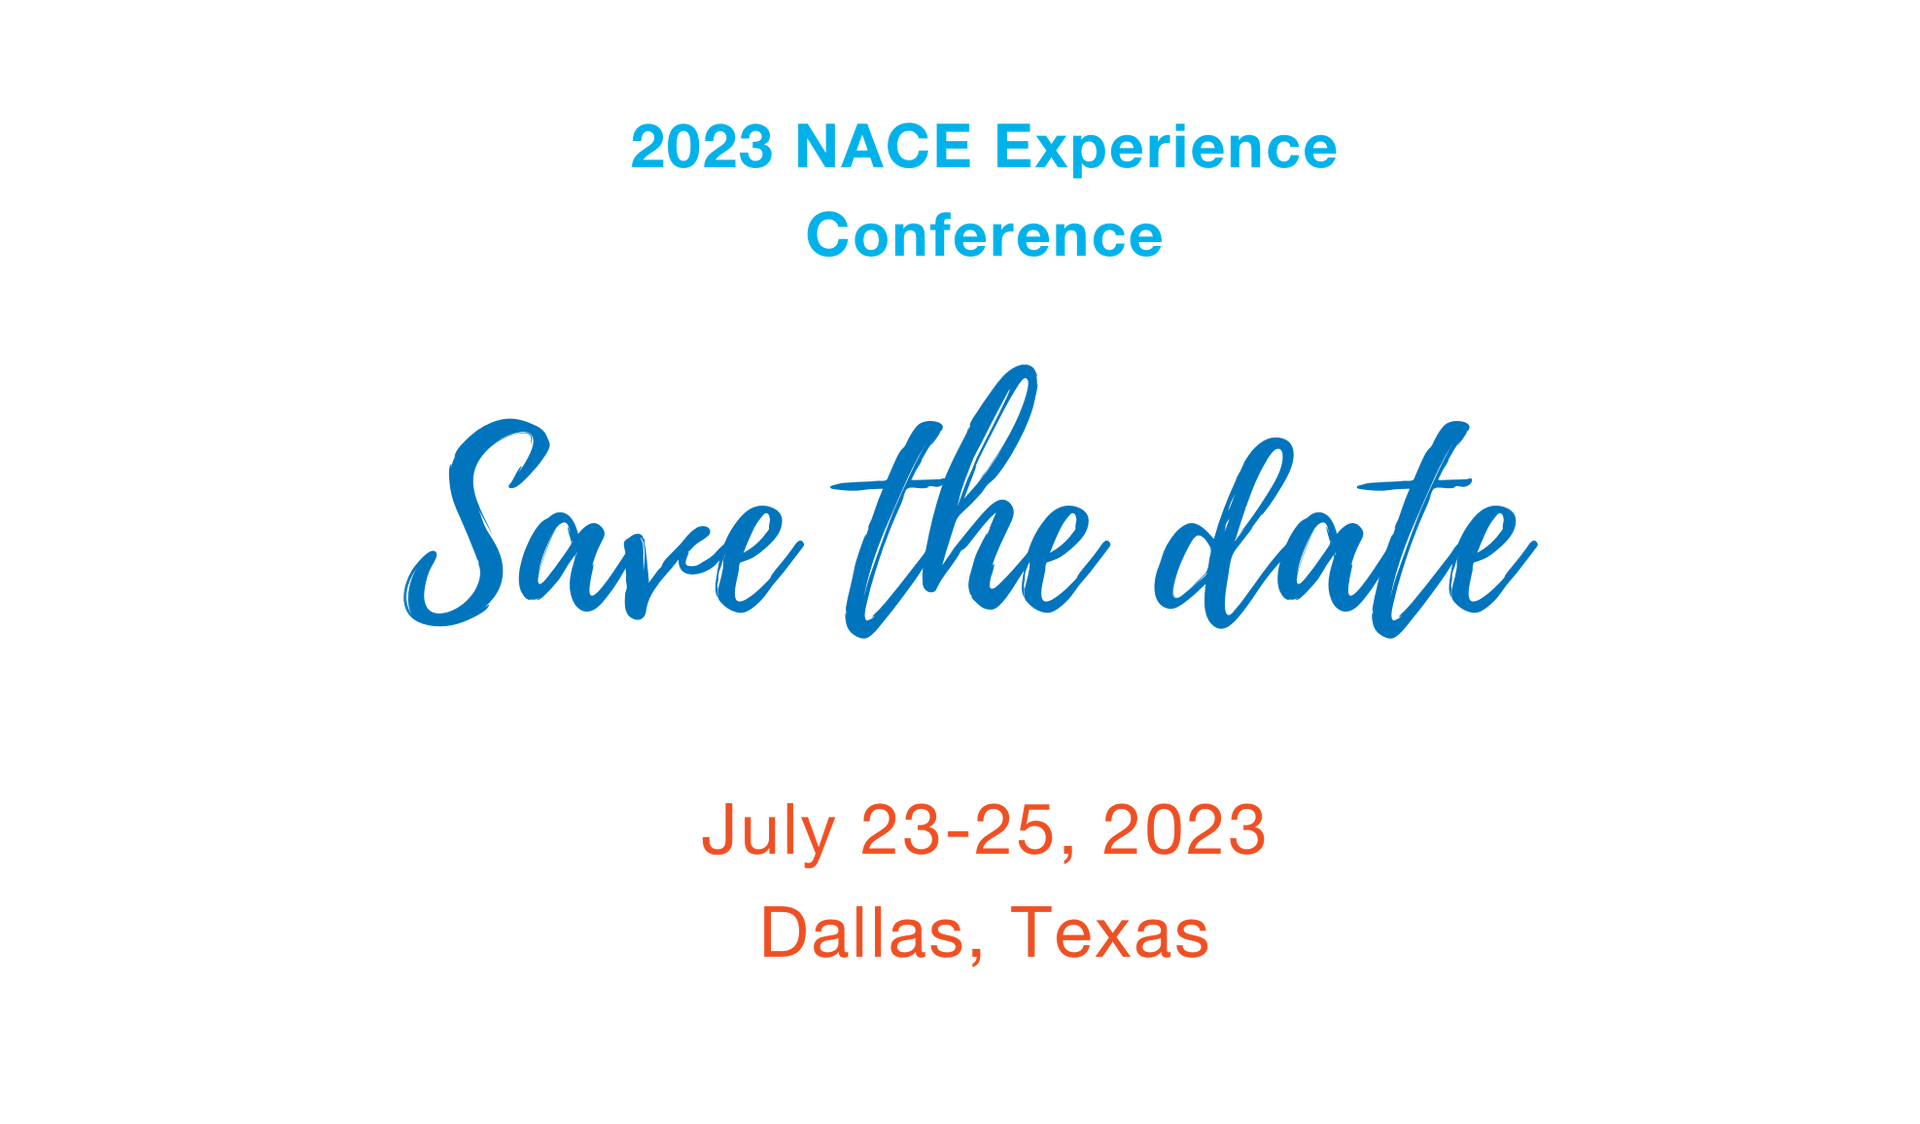 thumbnails 2023 NACE Experience Conference - Save the Date